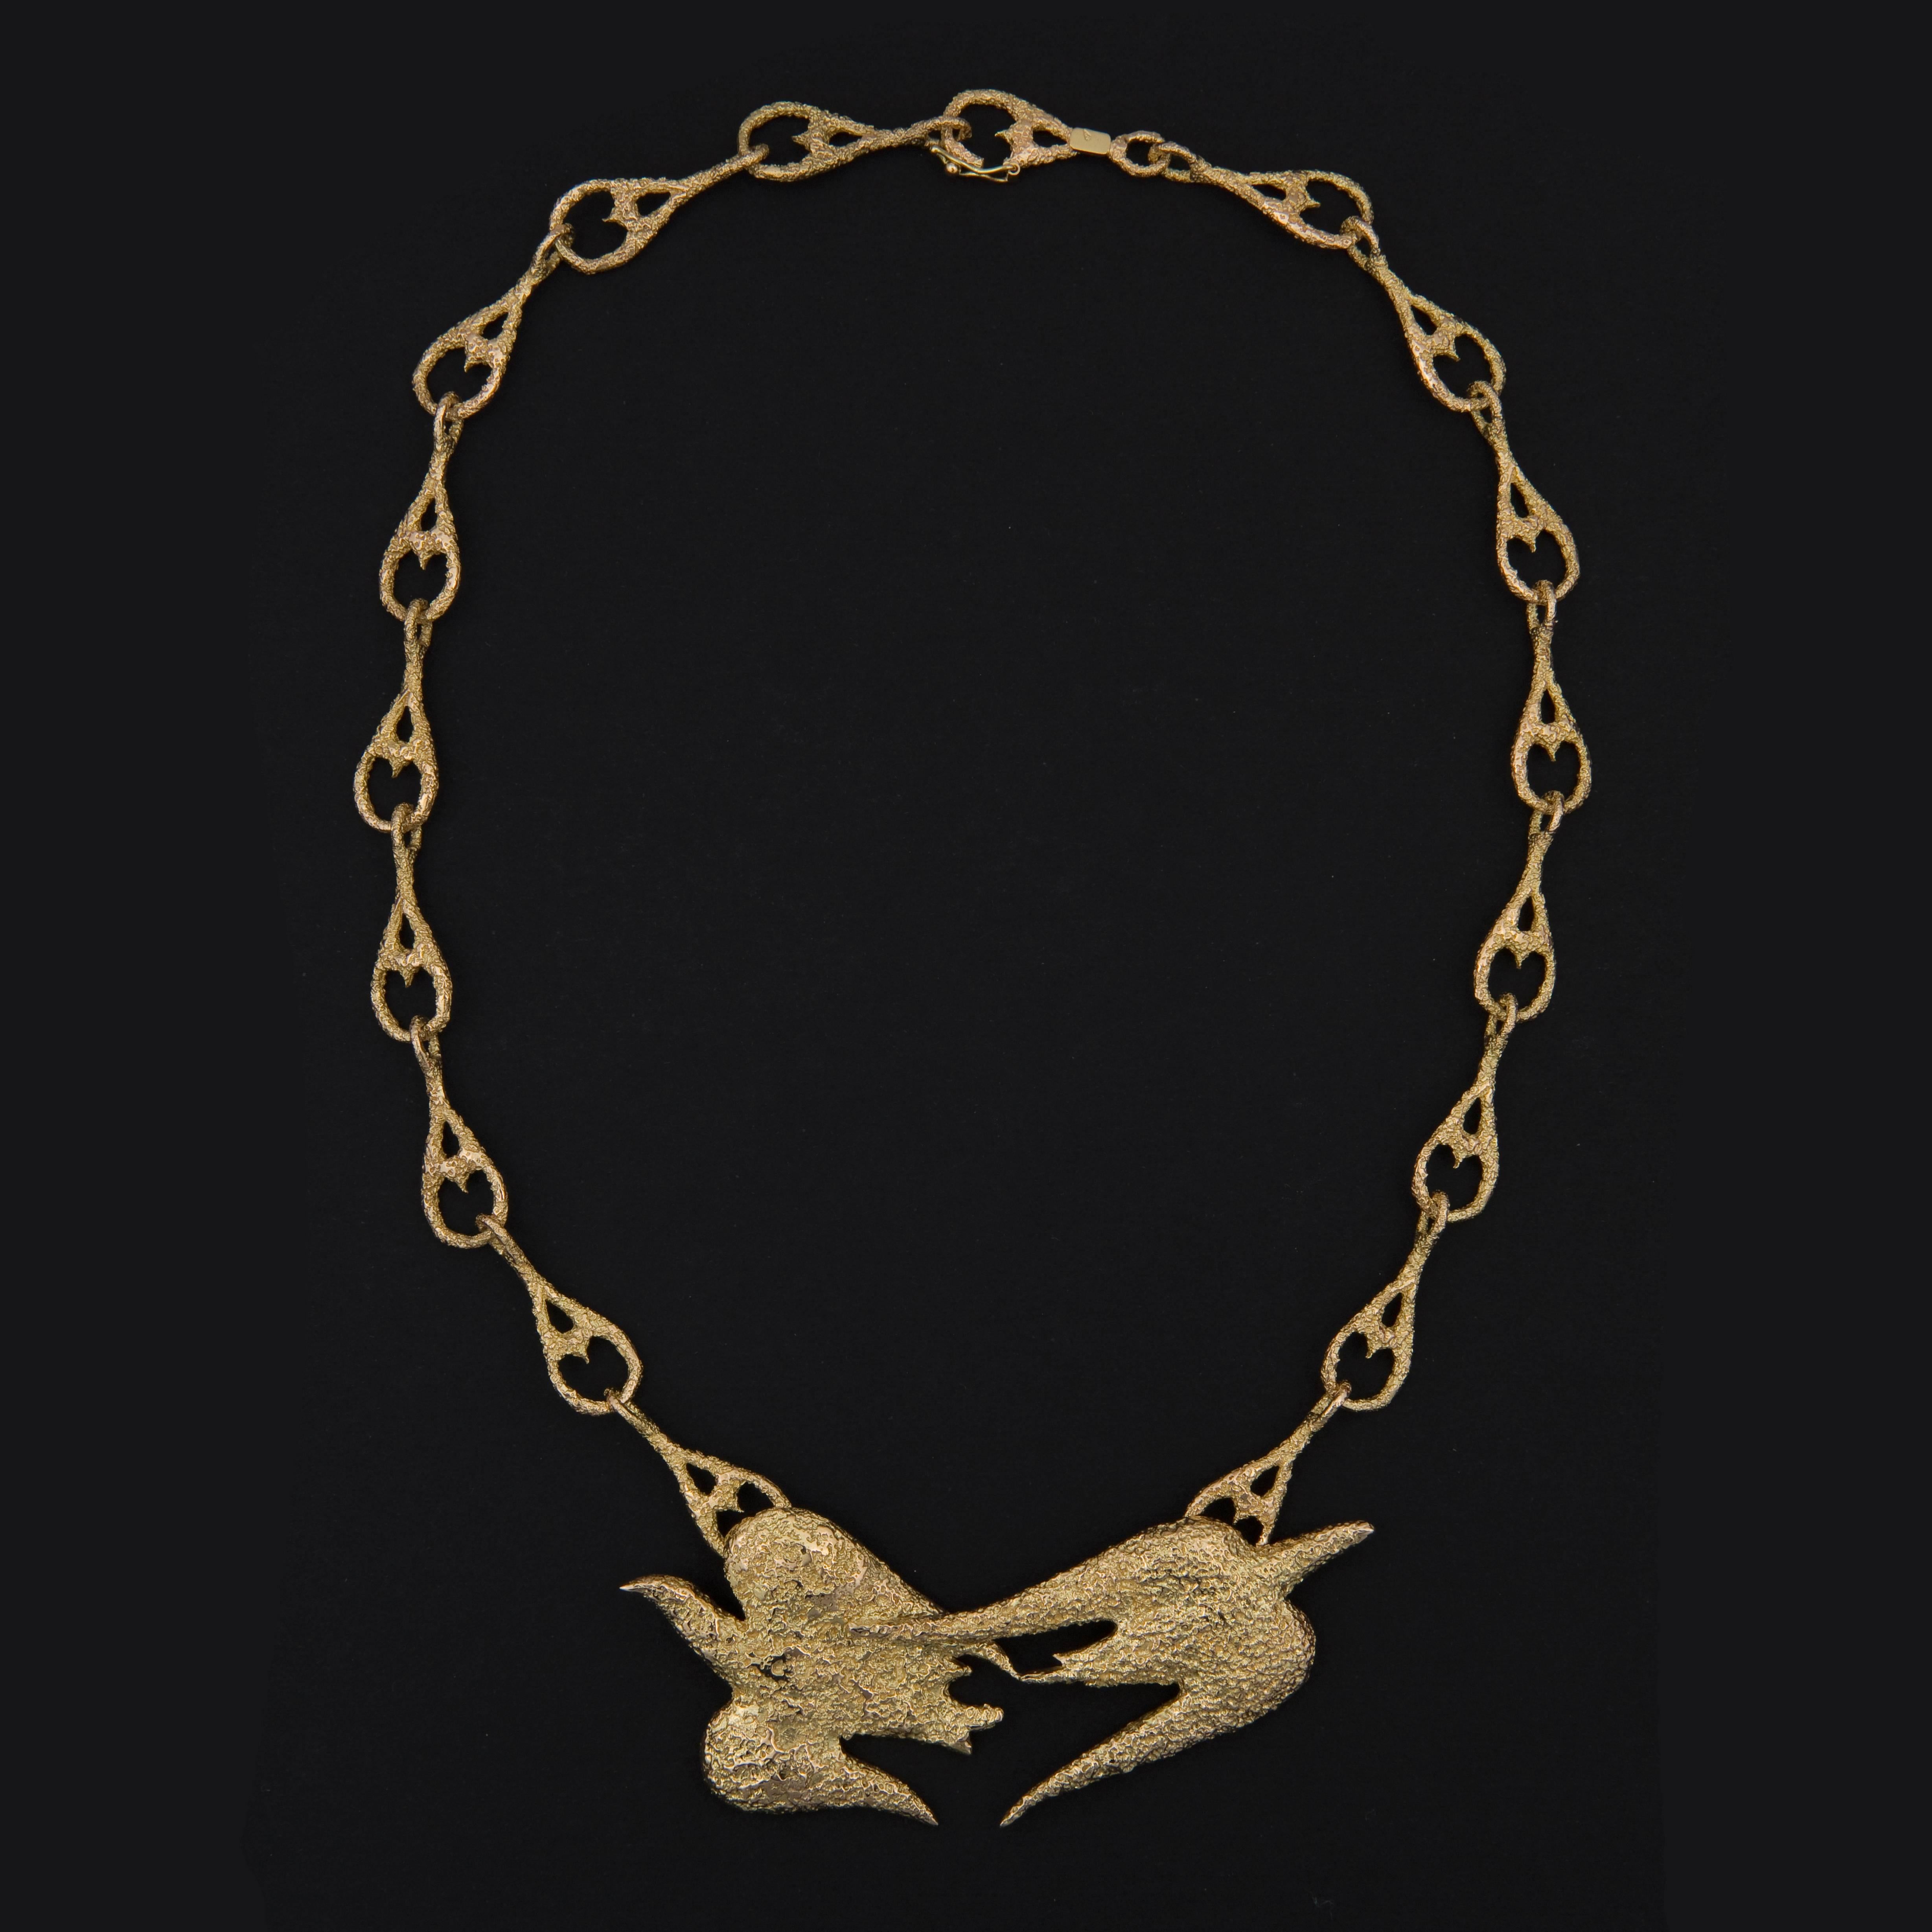 Exceptional 18K Gold Necklace by Georges Braque (1882-1963), inventor of cubism.
The piece is signed "Bijoux de Braque" and numbered 3/8. 
The Chain is 48cm long (18,9inch)
The gouache of Zetes et Calaïs and "Merope" from